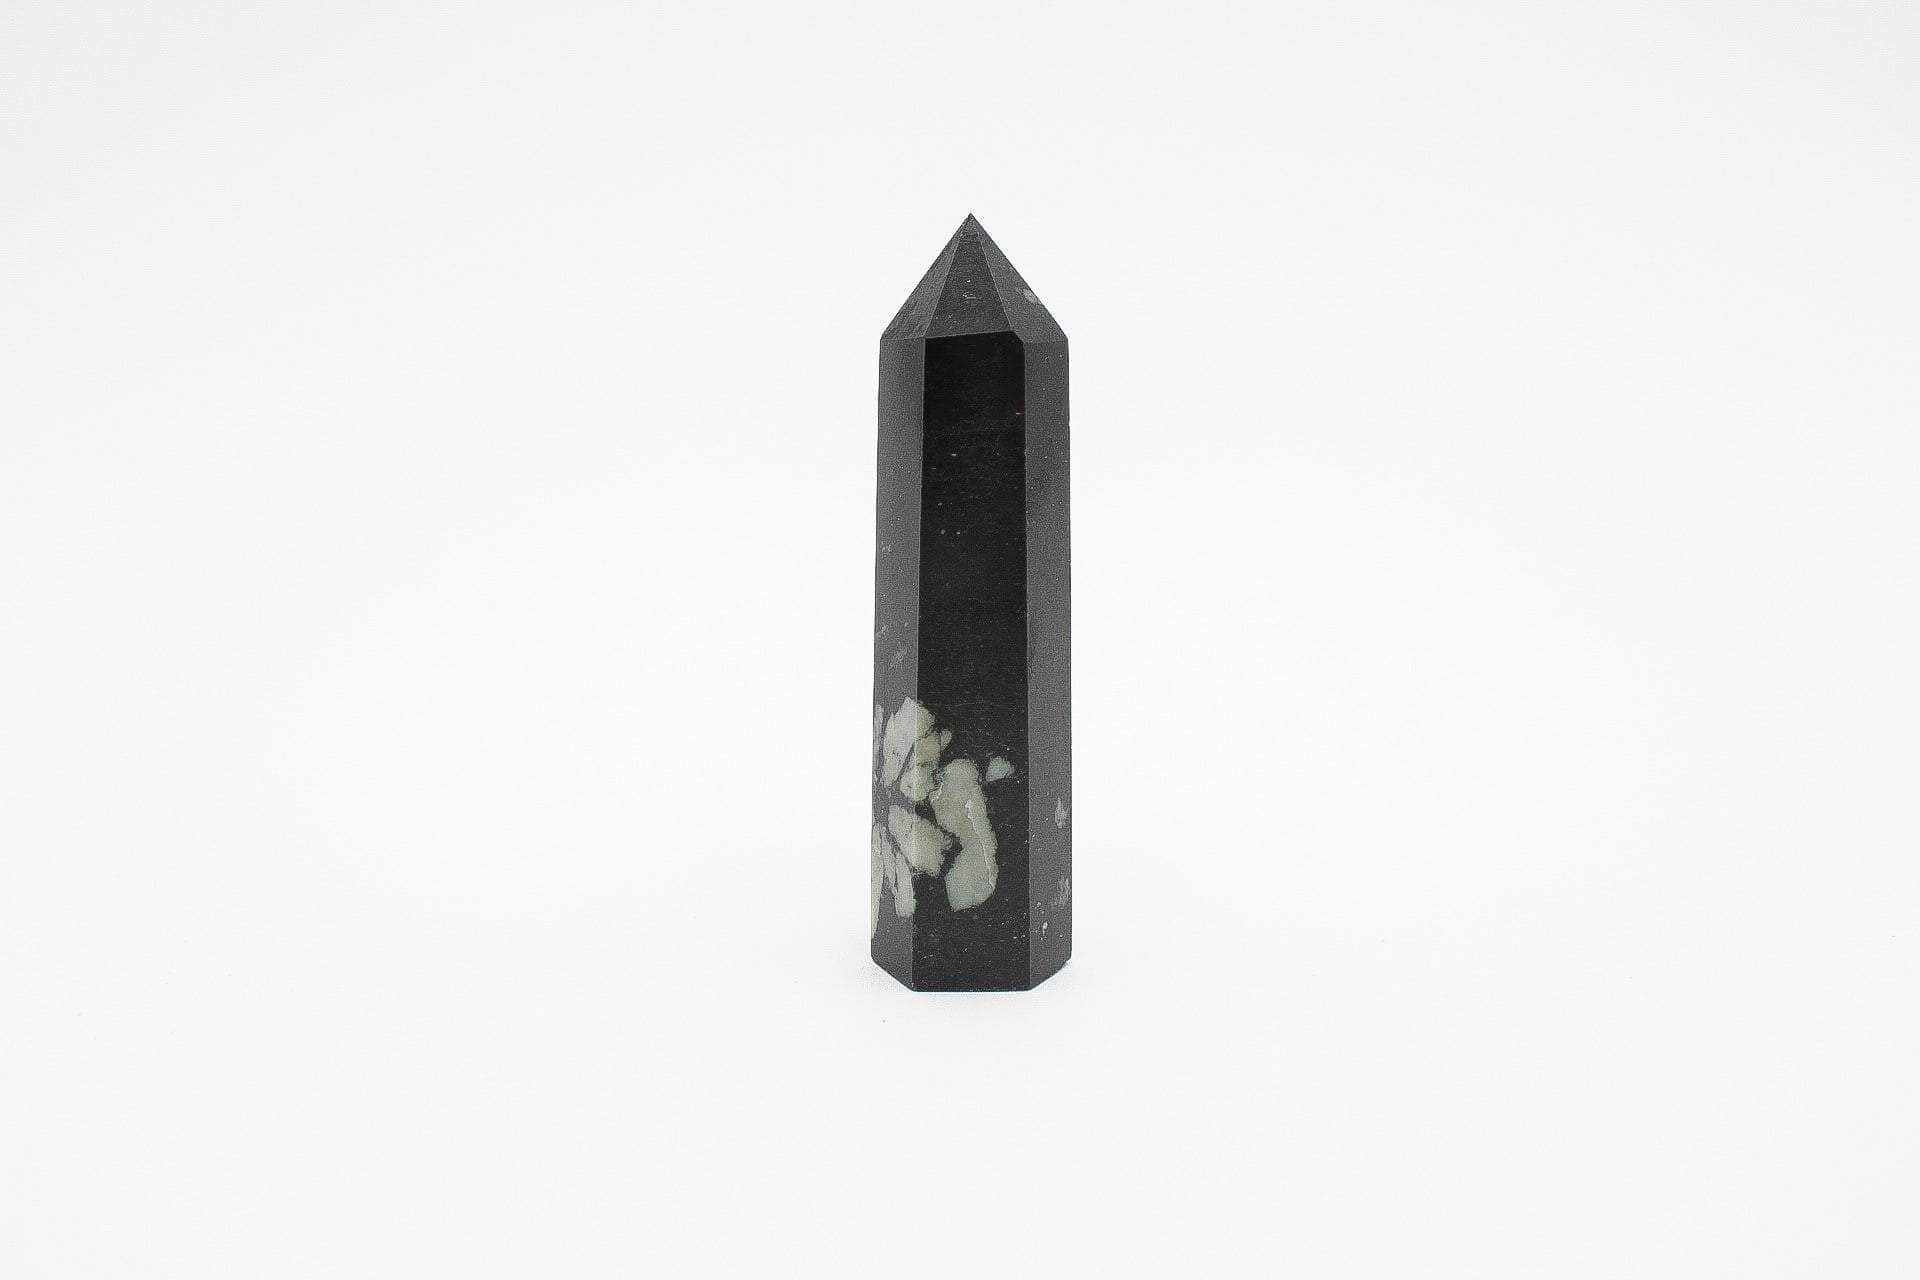 6-11 Crystals Crystal Chinese Writing Stone Tower (cw-02) 3.6" Tall